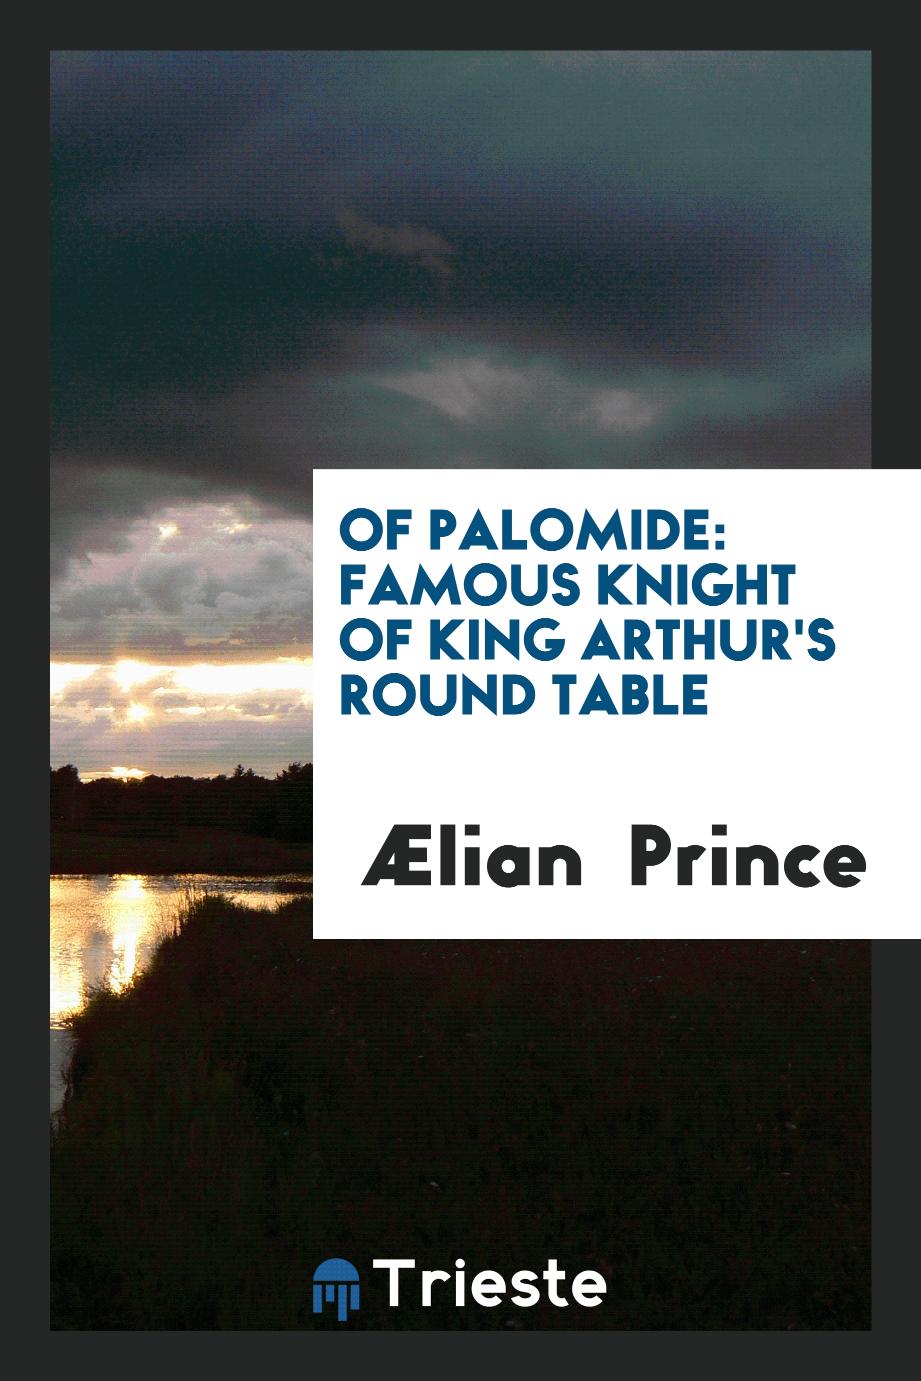 Of Palomide: Famous Knight of King Arthur's Round Table